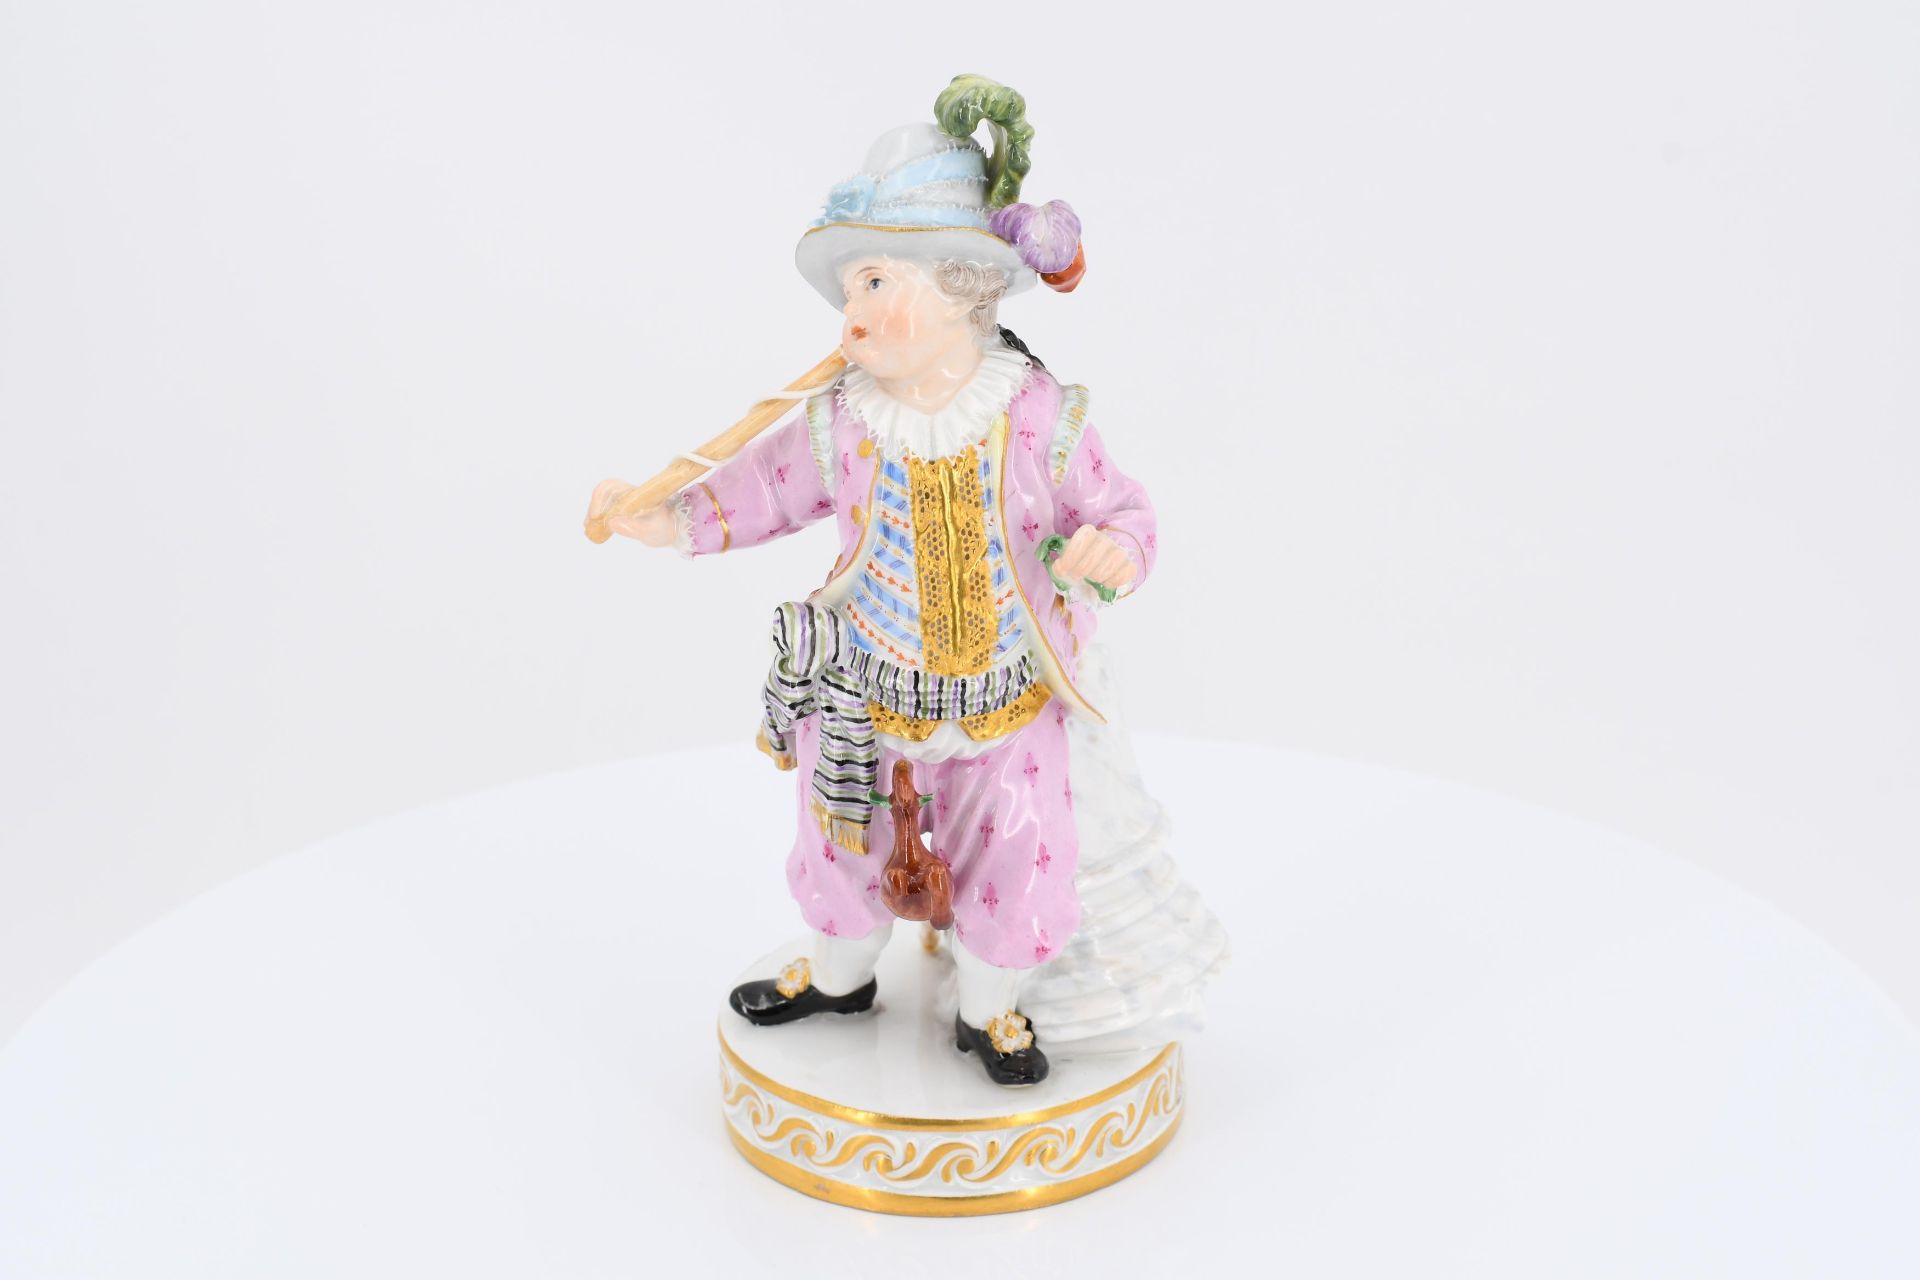 Porcelain figurines of boy with stick horse and lady feeding kitten - Image 2 of 11